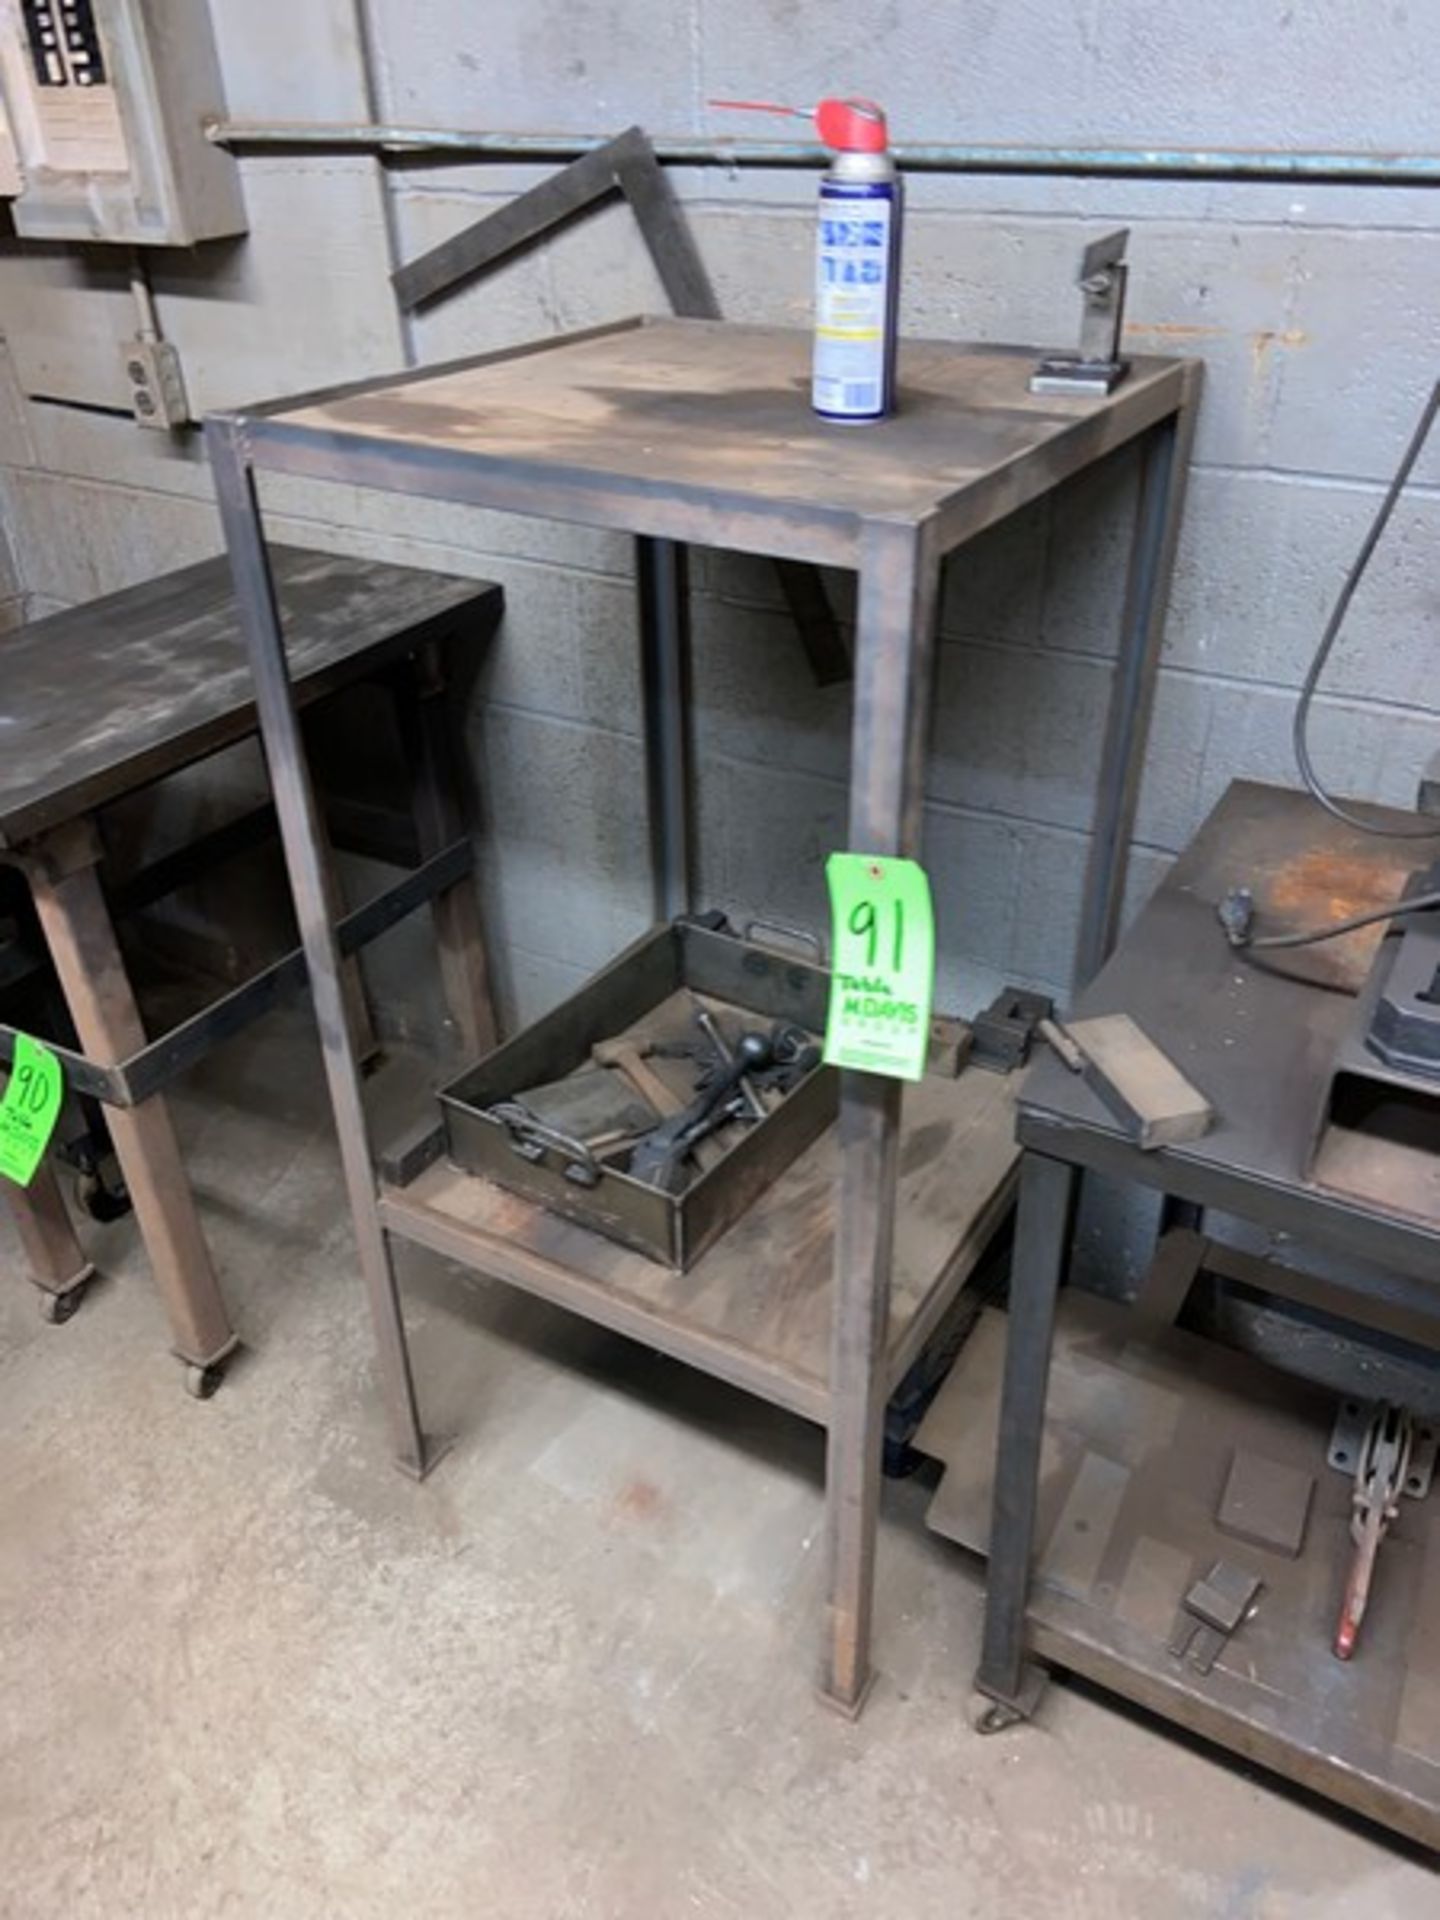 Double Shelf Table, Overall Dims.: Aprox. 24-1/2” L x 24-1/2” W x 49” H (LOCATED IN CORRY, PA)